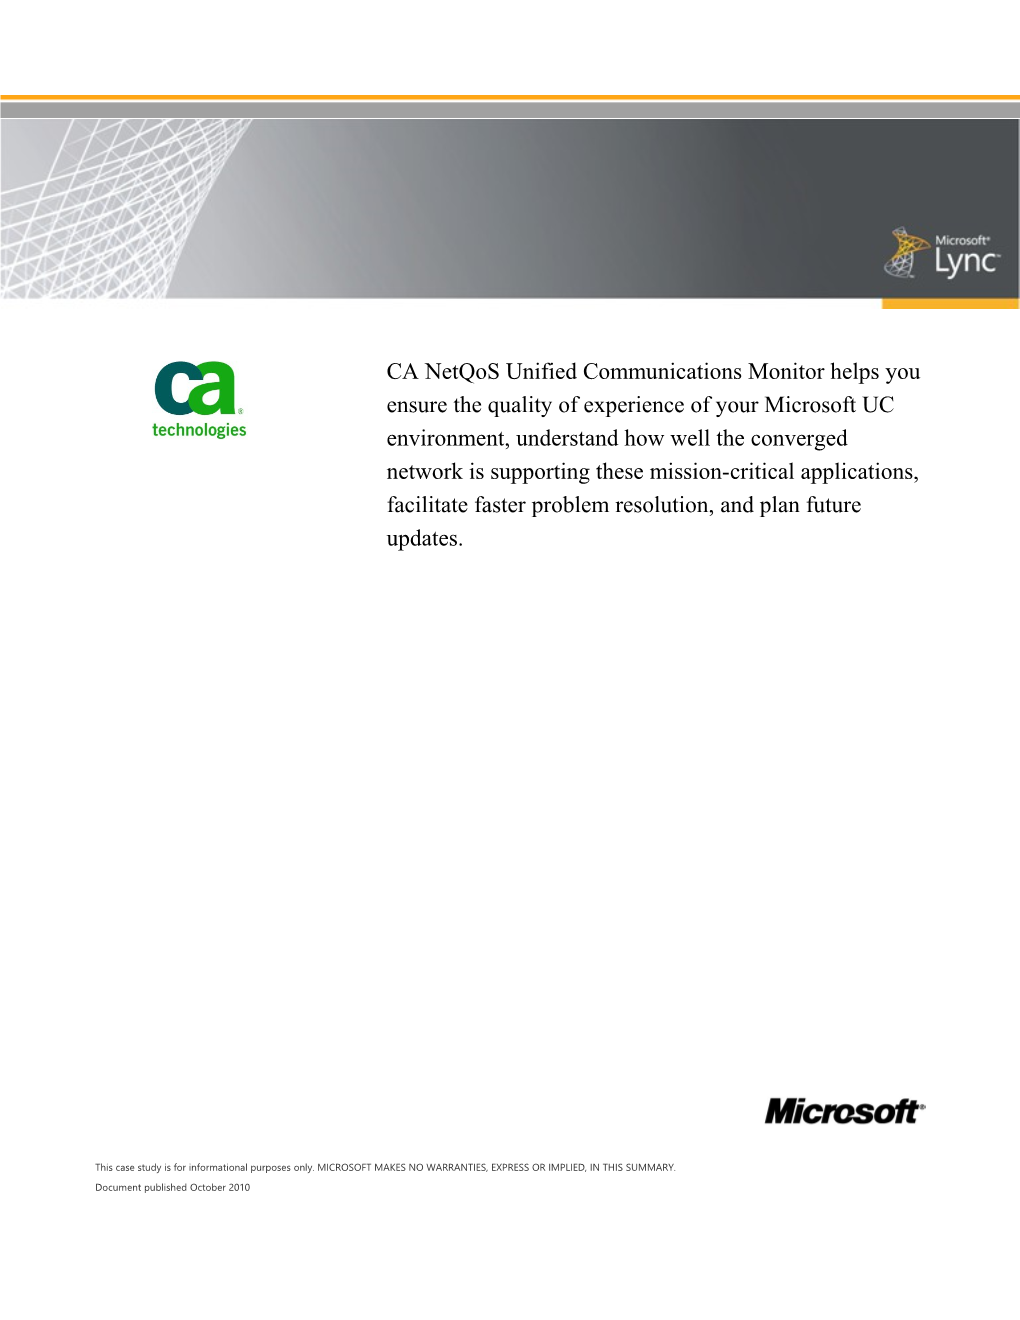 CA Netqos Unified Communications Monitor Helps You Ensure the Quality of Experience Of